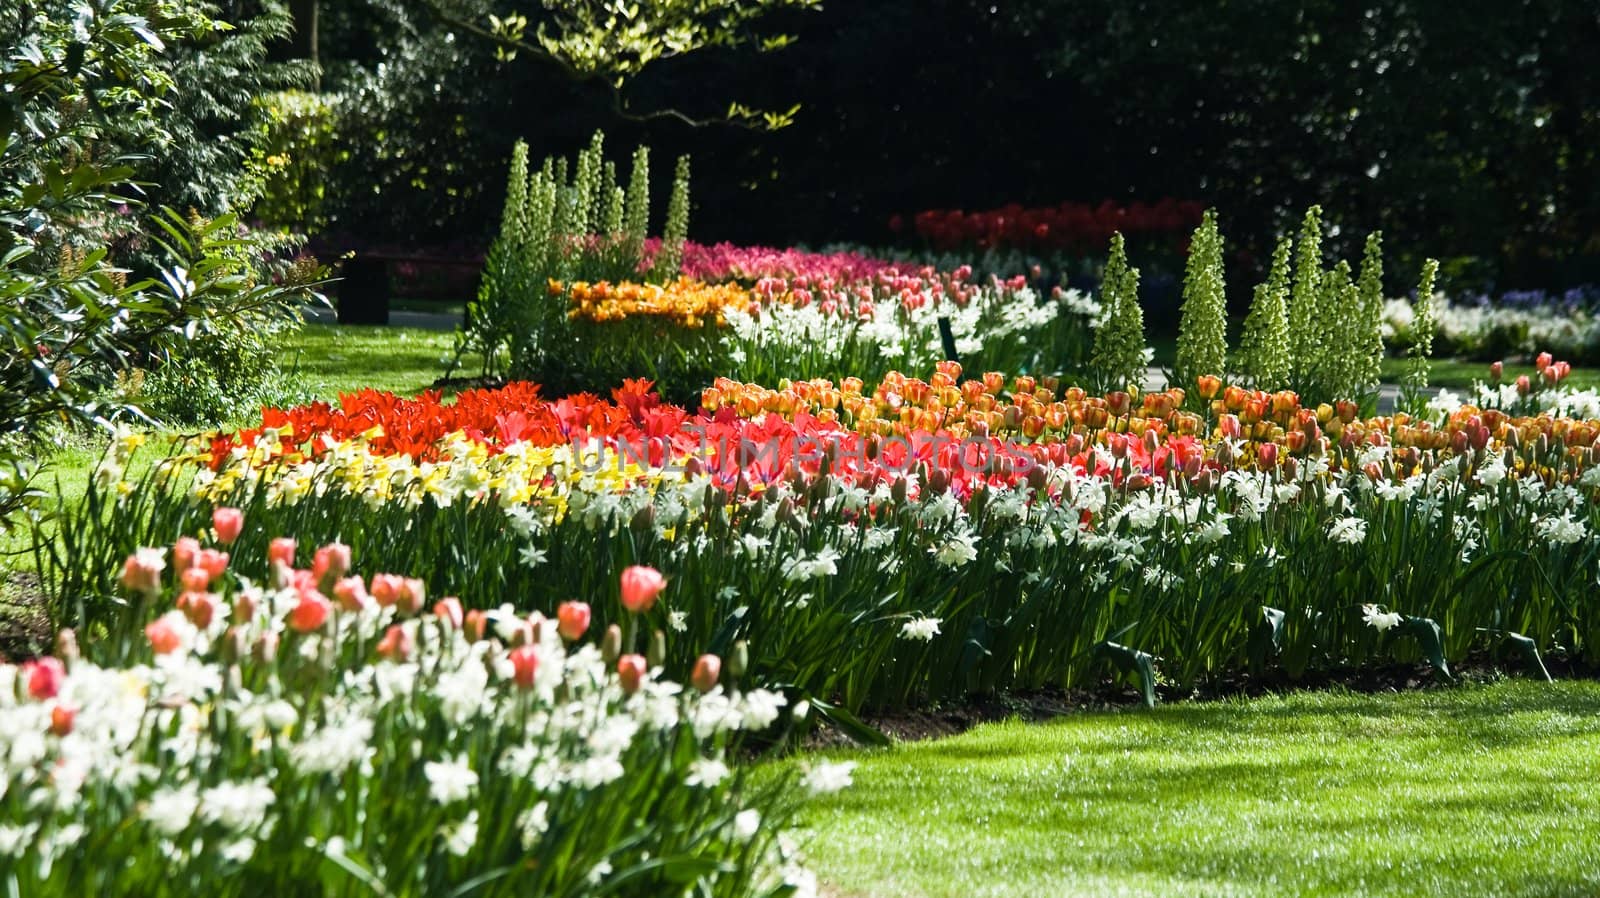 Red, pink and white daffodils and tulips in spring